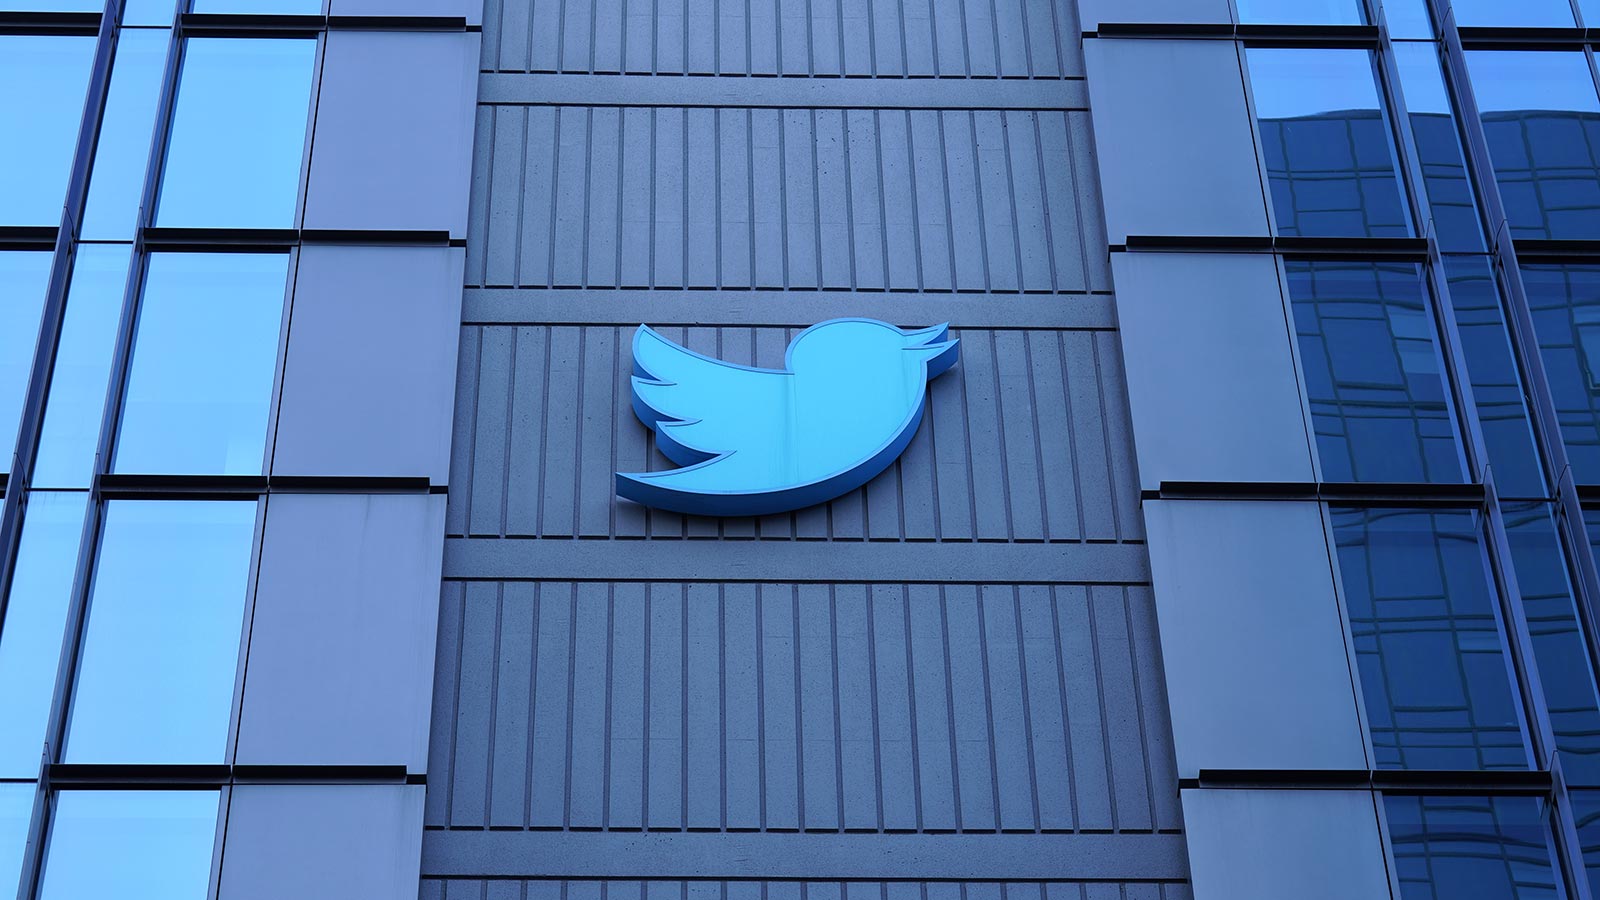 The blue Twitter bird logo on the outside wall of a building.